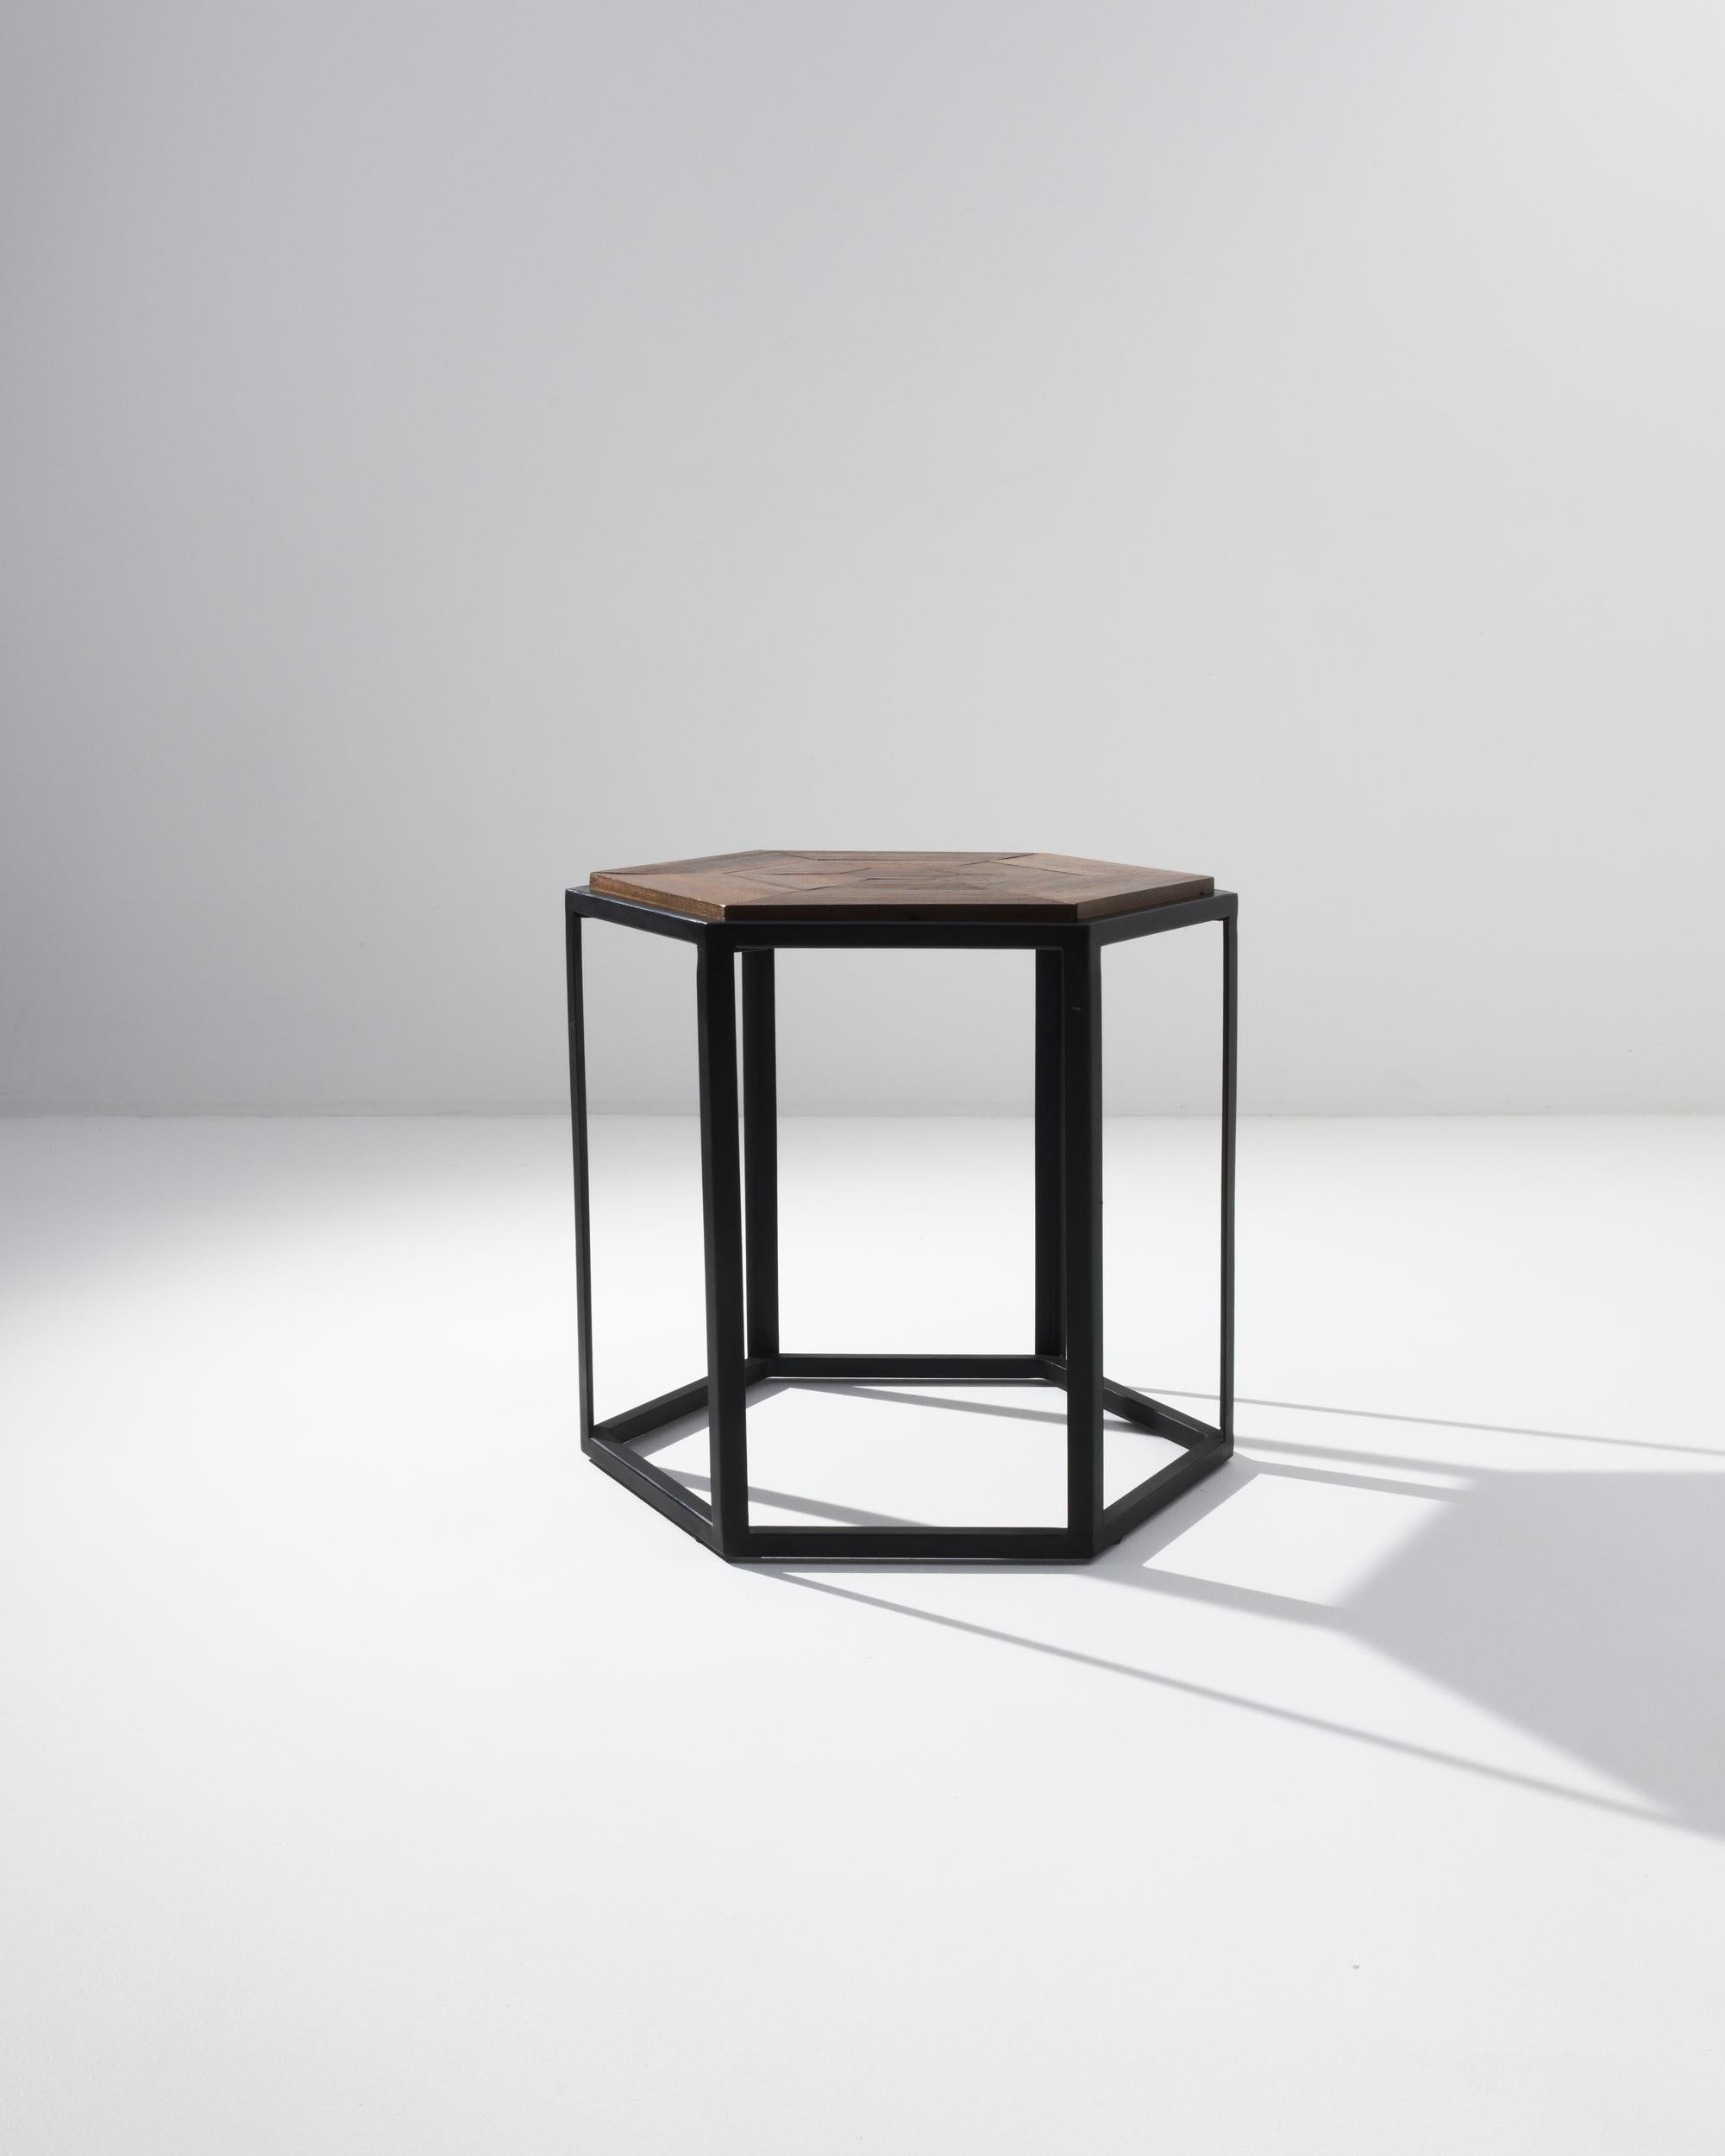 Minimalist Wooden Coffee Table Prototype with Metal Geometric Base  For Sale